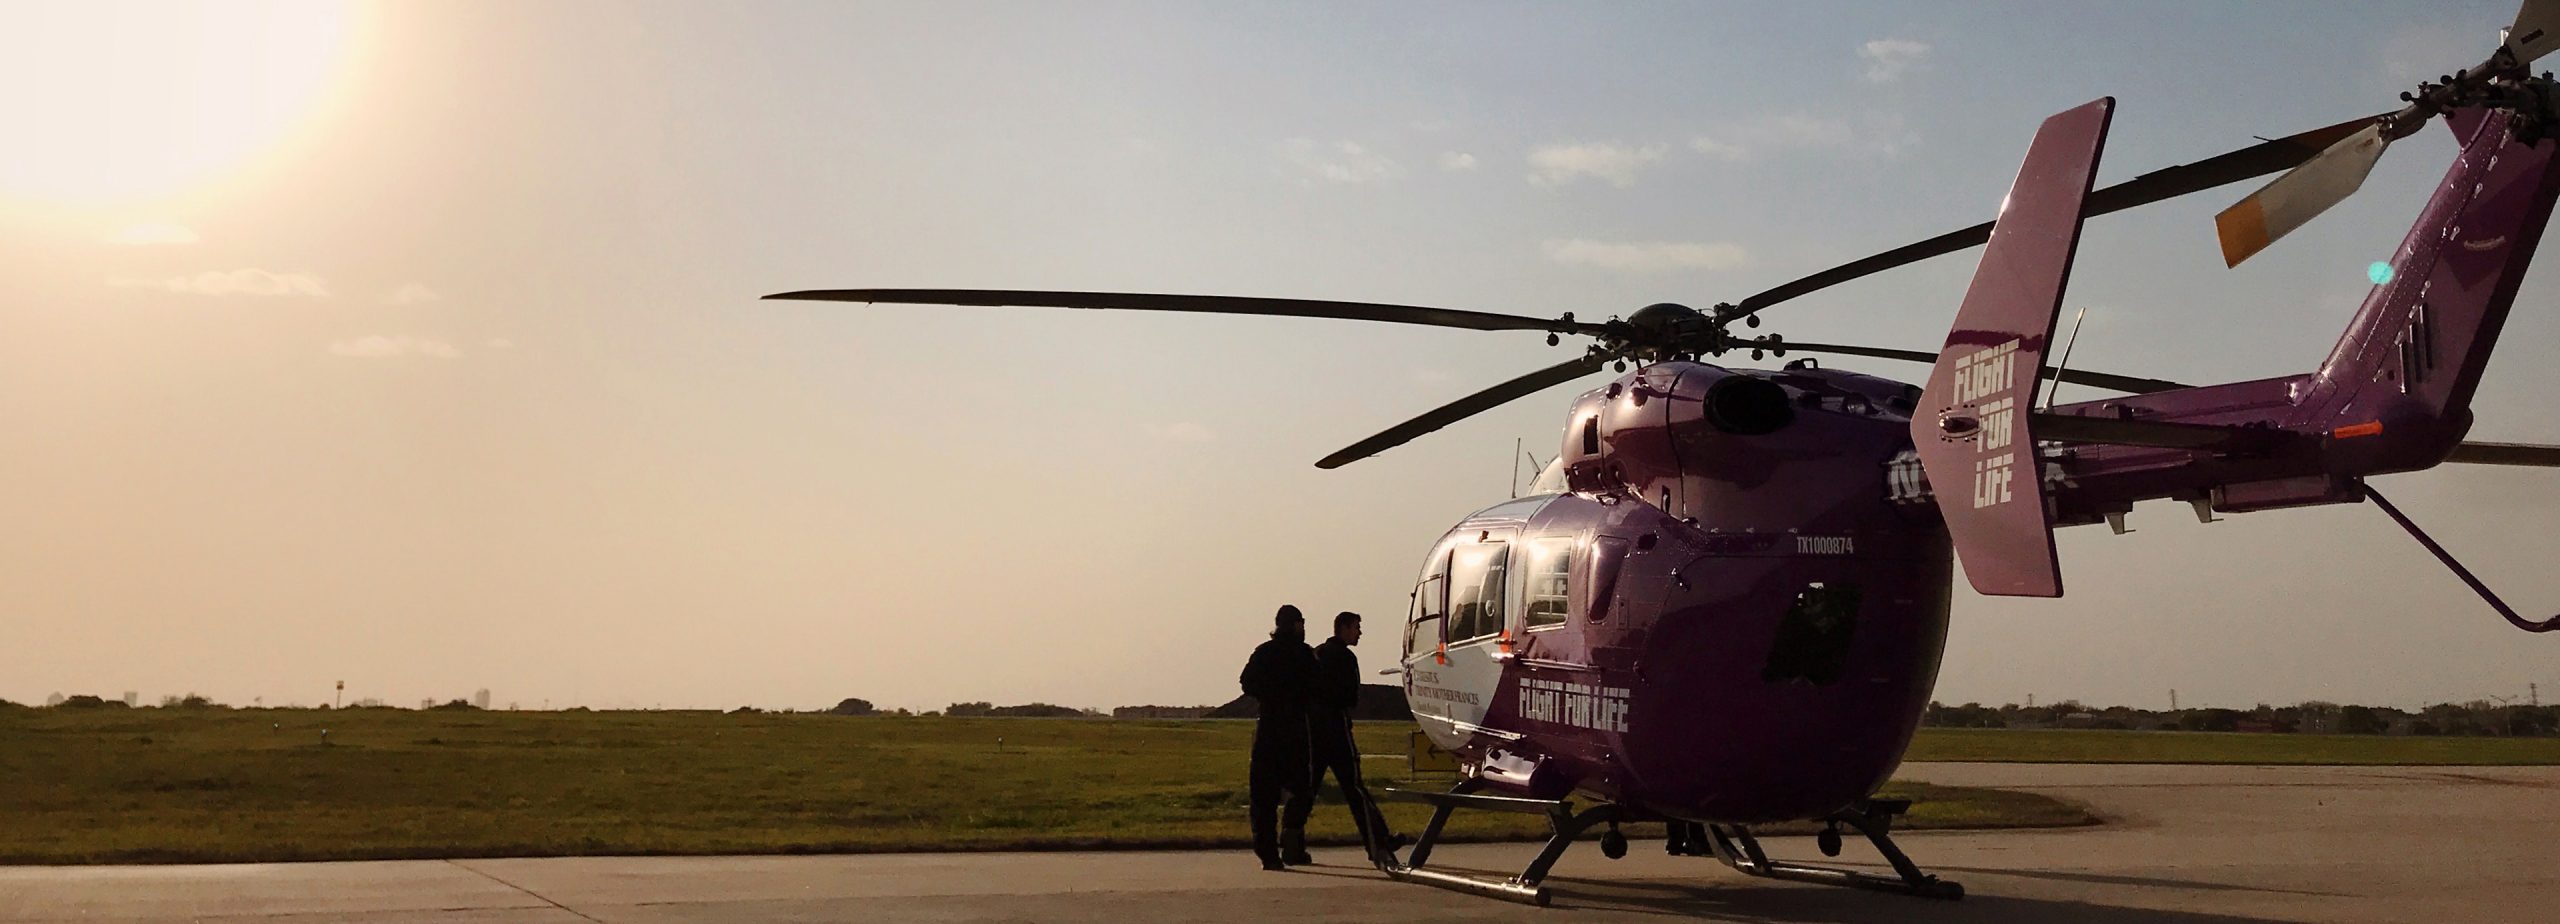 A Flight For Life helicopter sits parked on a runway tarmac, with two crew members next to it.